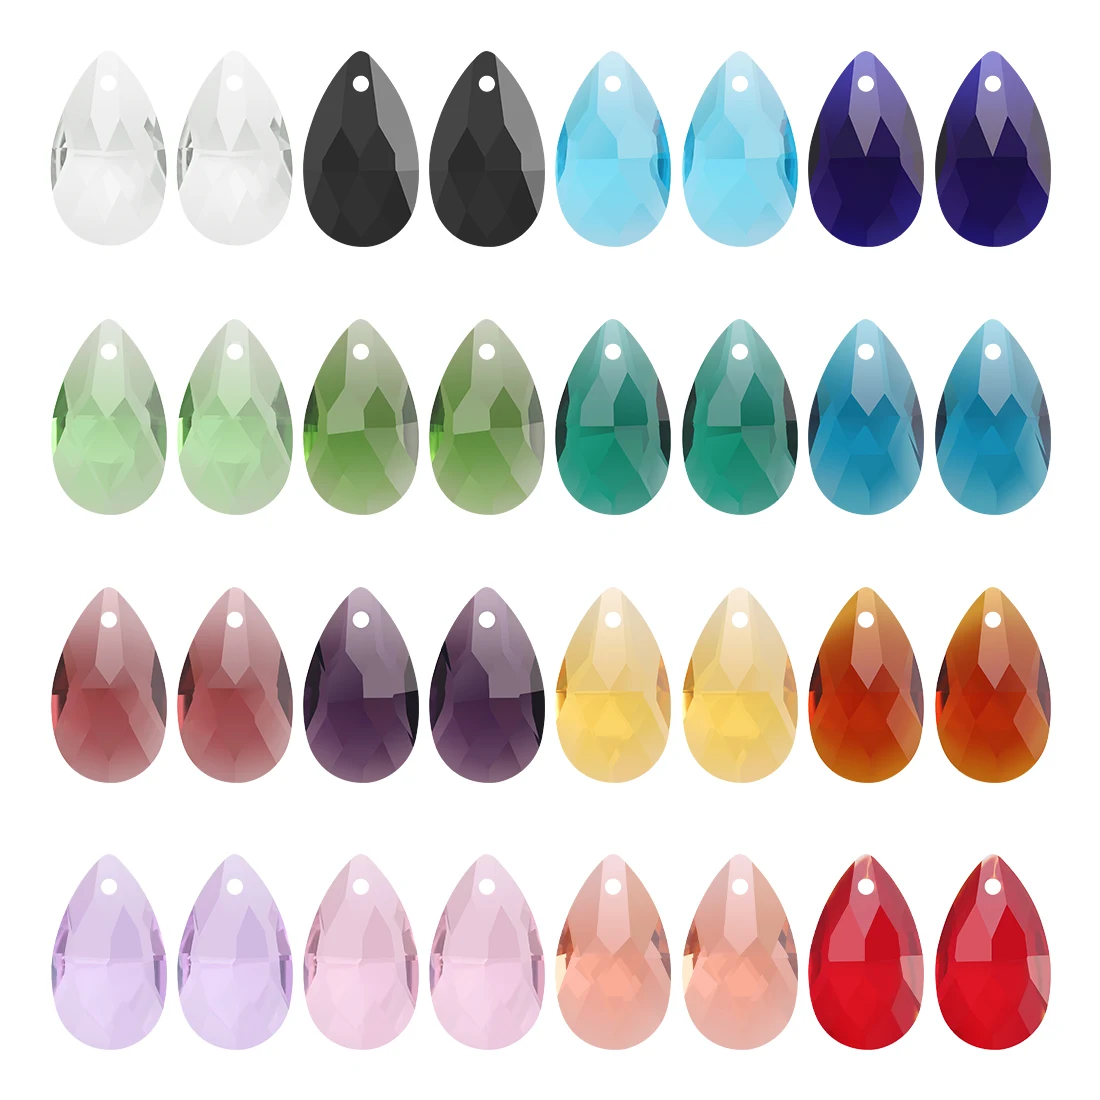 

20Pcs/Lot Lampwork Glass Teardrop Beads Red 13X22mm Crystal Drop Pendant For DIY Jewelry Making Necklaces Handicrafts Supplies